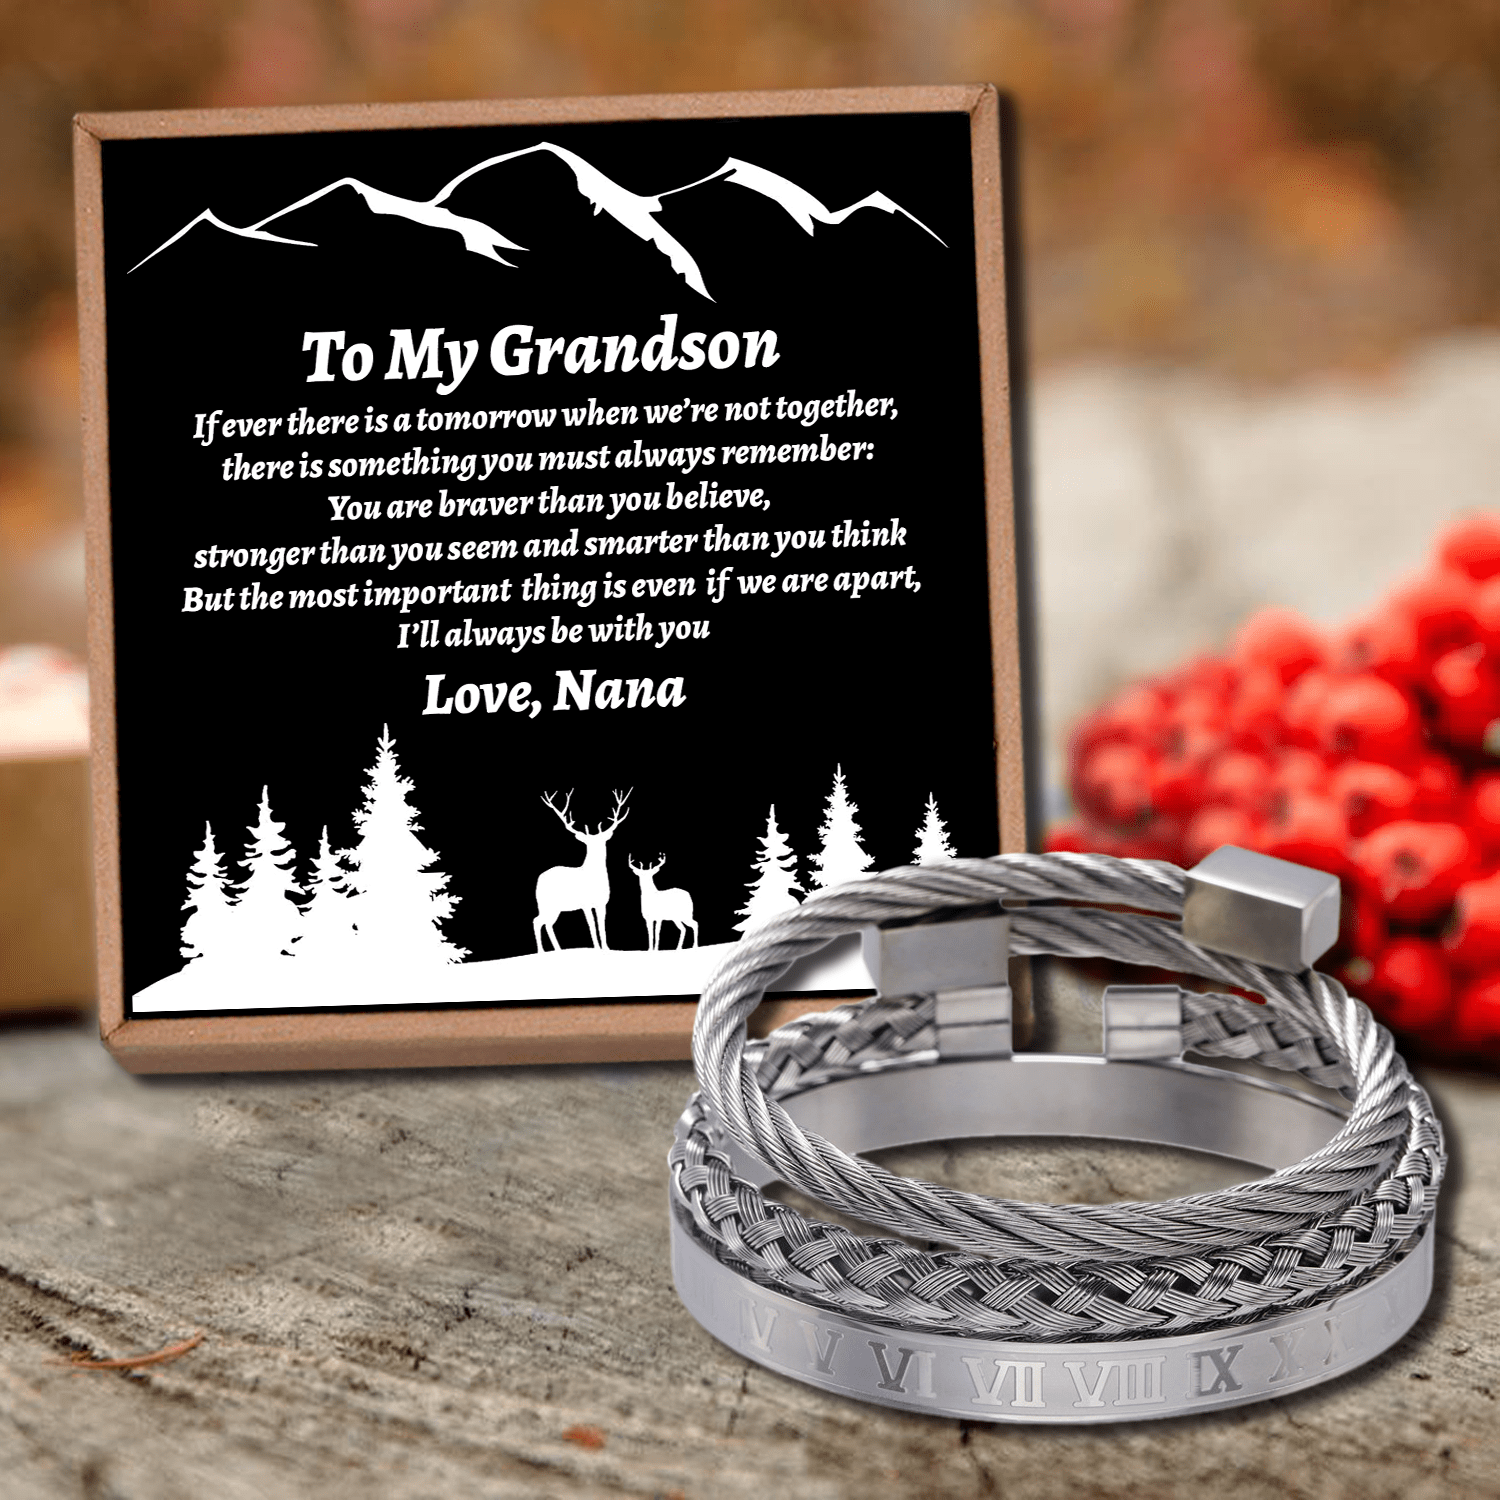 Bracelets Nana To Grandson - I Will Always Be With You Roman Numeral Bracelet Set Silver GiveMe-Gifts